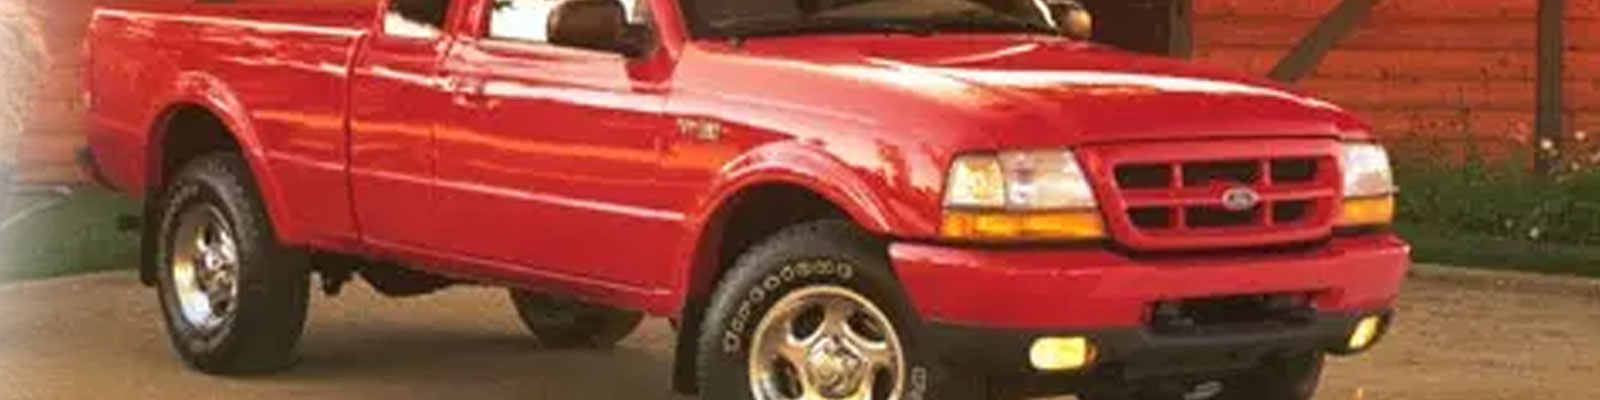 Accessories For The Ford Ranger Super Cab 1999-2003